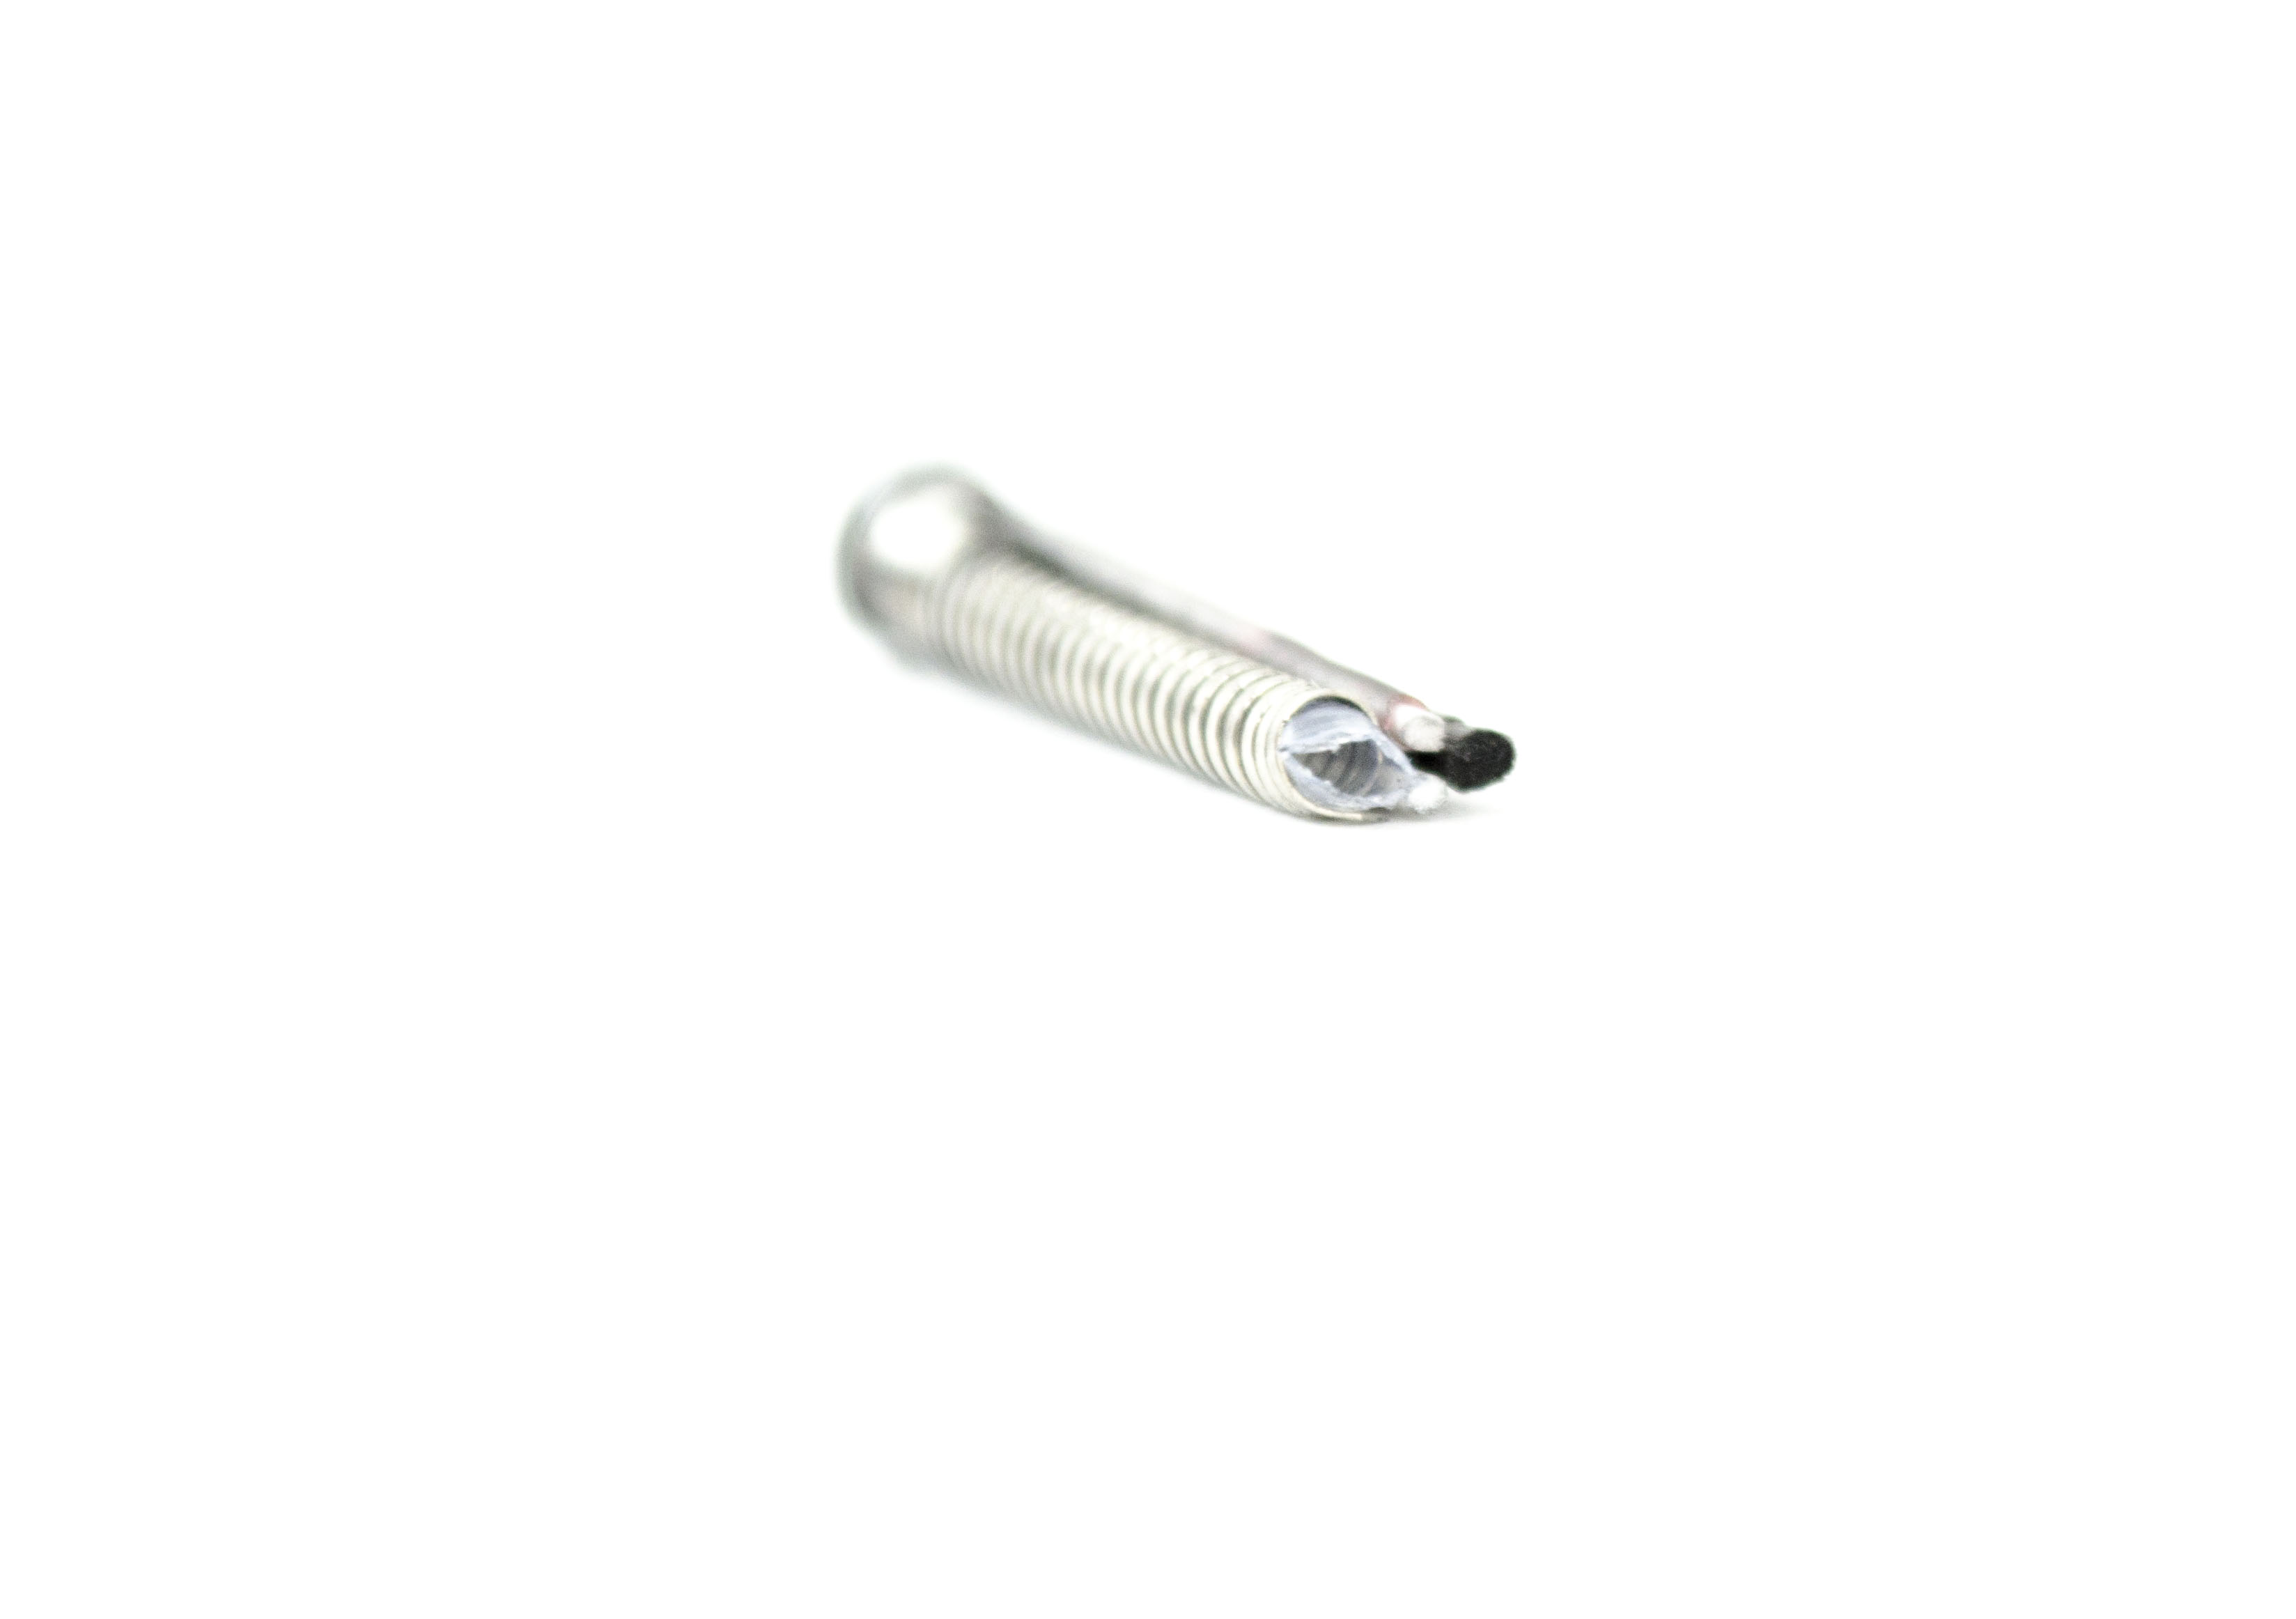 OEM Distal Tip with Lenses, C-Cover, and Objective Stack - BF-P40